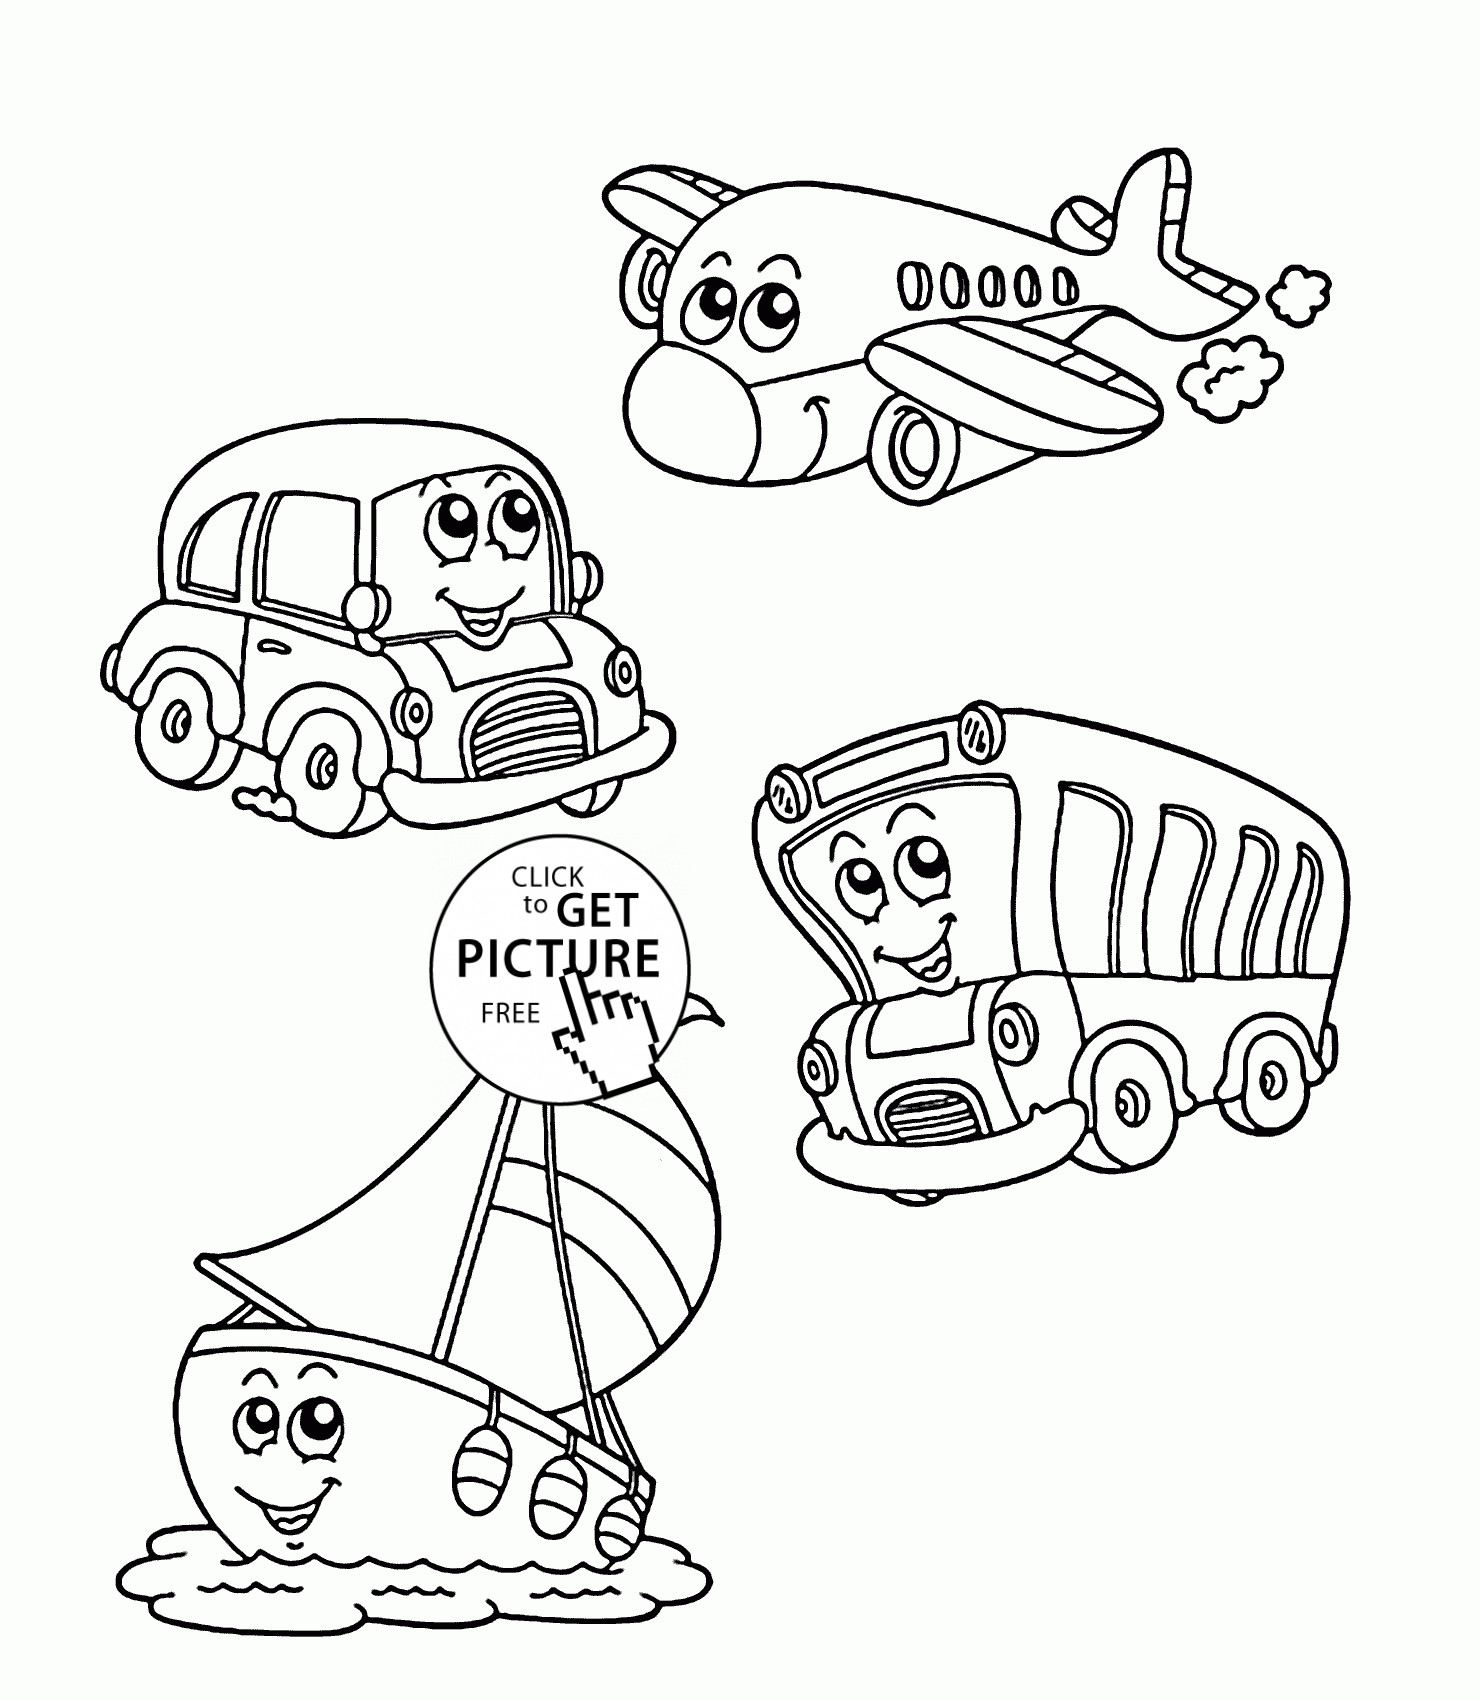 Transportation Coloring Pages For Toddlers
 Funny Transportation coloring page for kids coloring